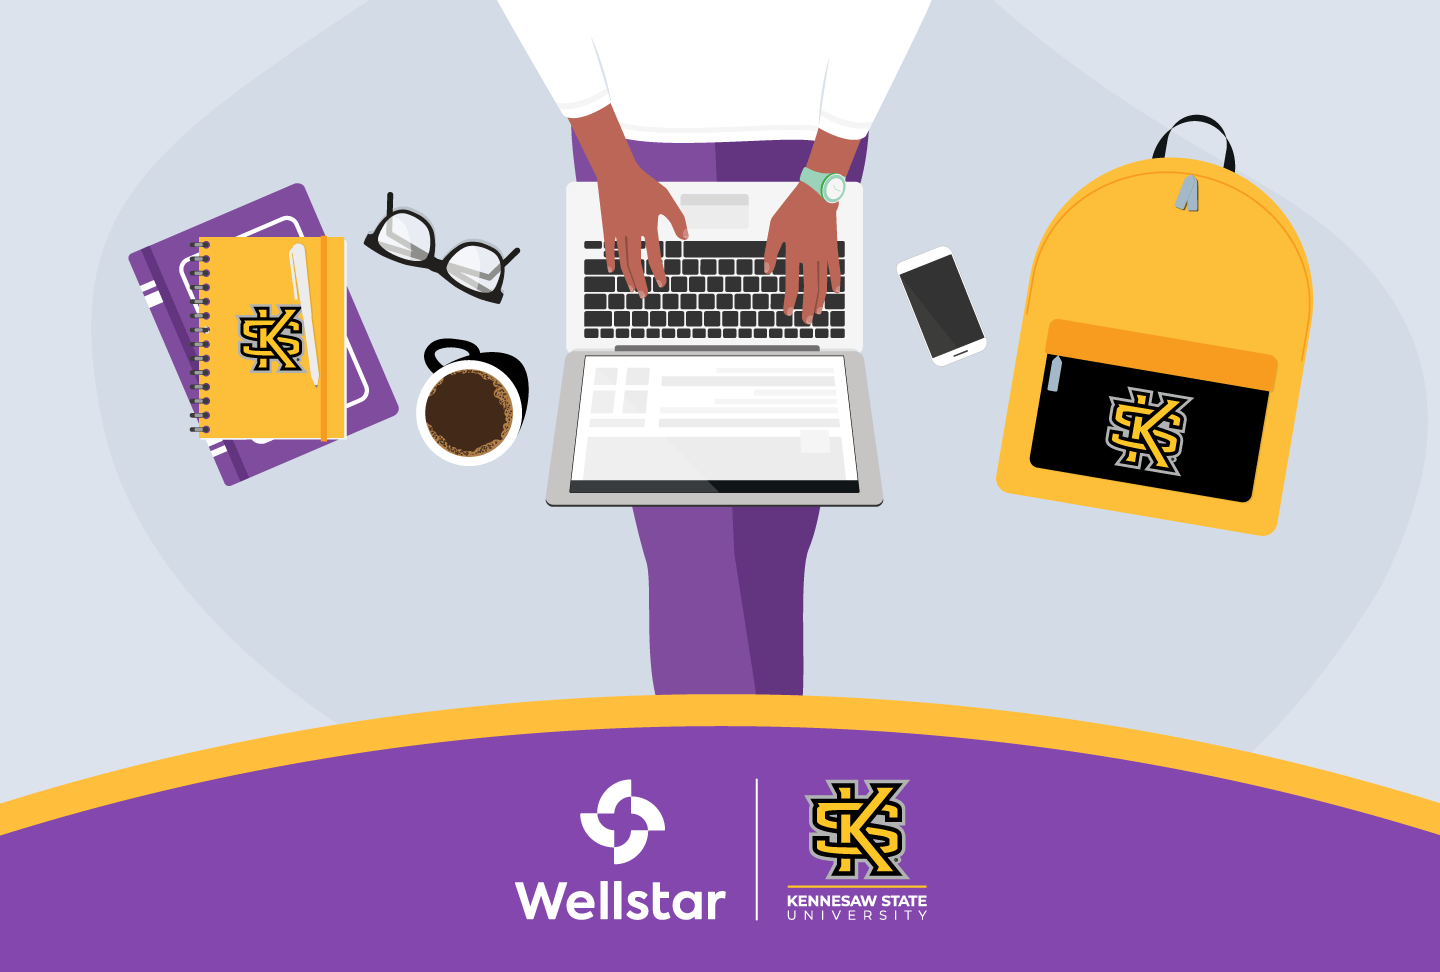 Illustration of student using laptop. Backpack and notebook with Kennesaw State University logo. Wellstar and Kennesaw State University logos at bottom of image.